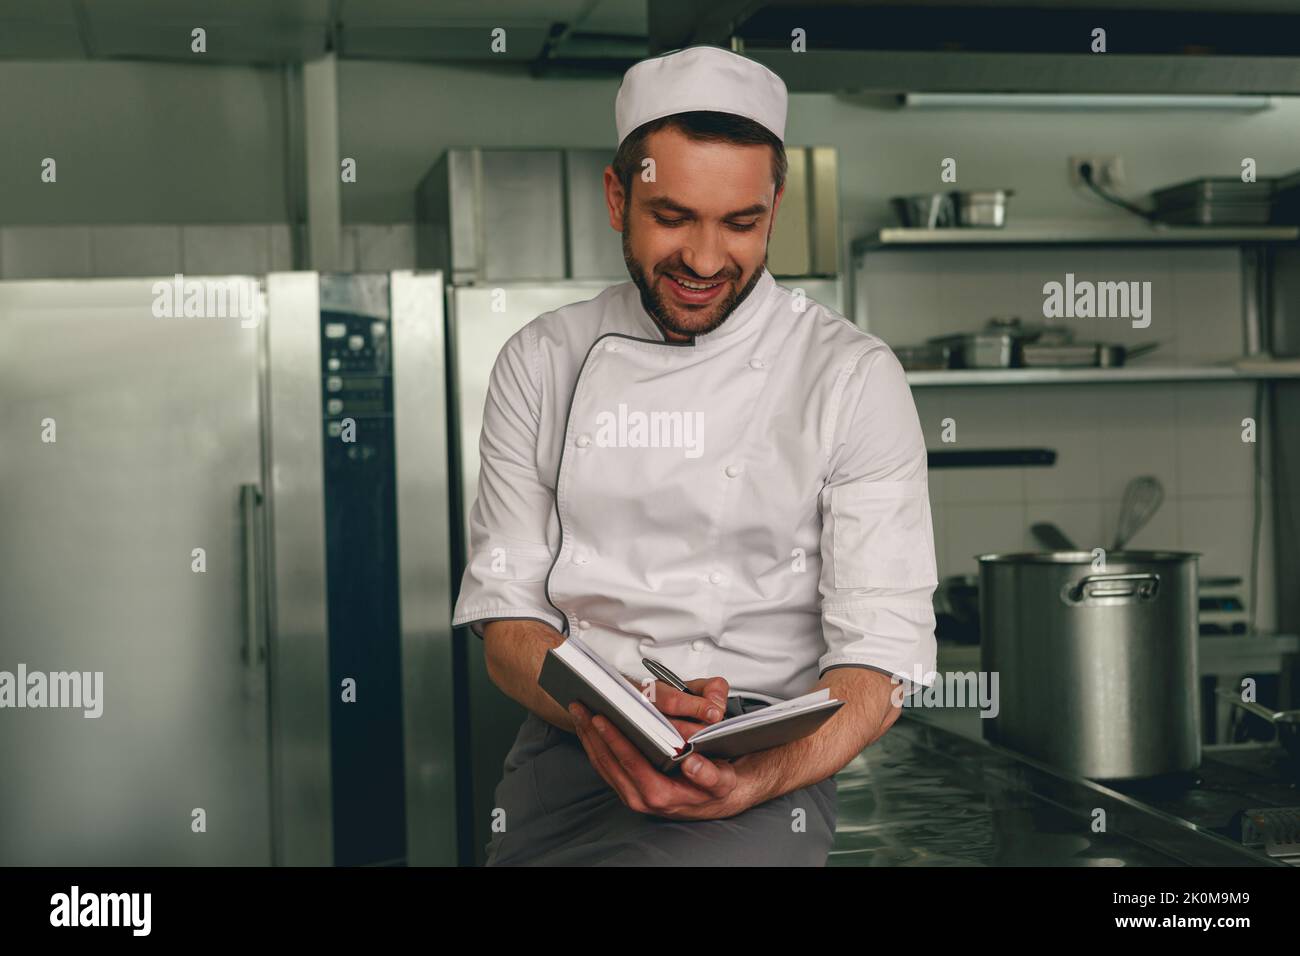 Smiling chef in uniform making notes in notebook standing on kitchen Stock Photo